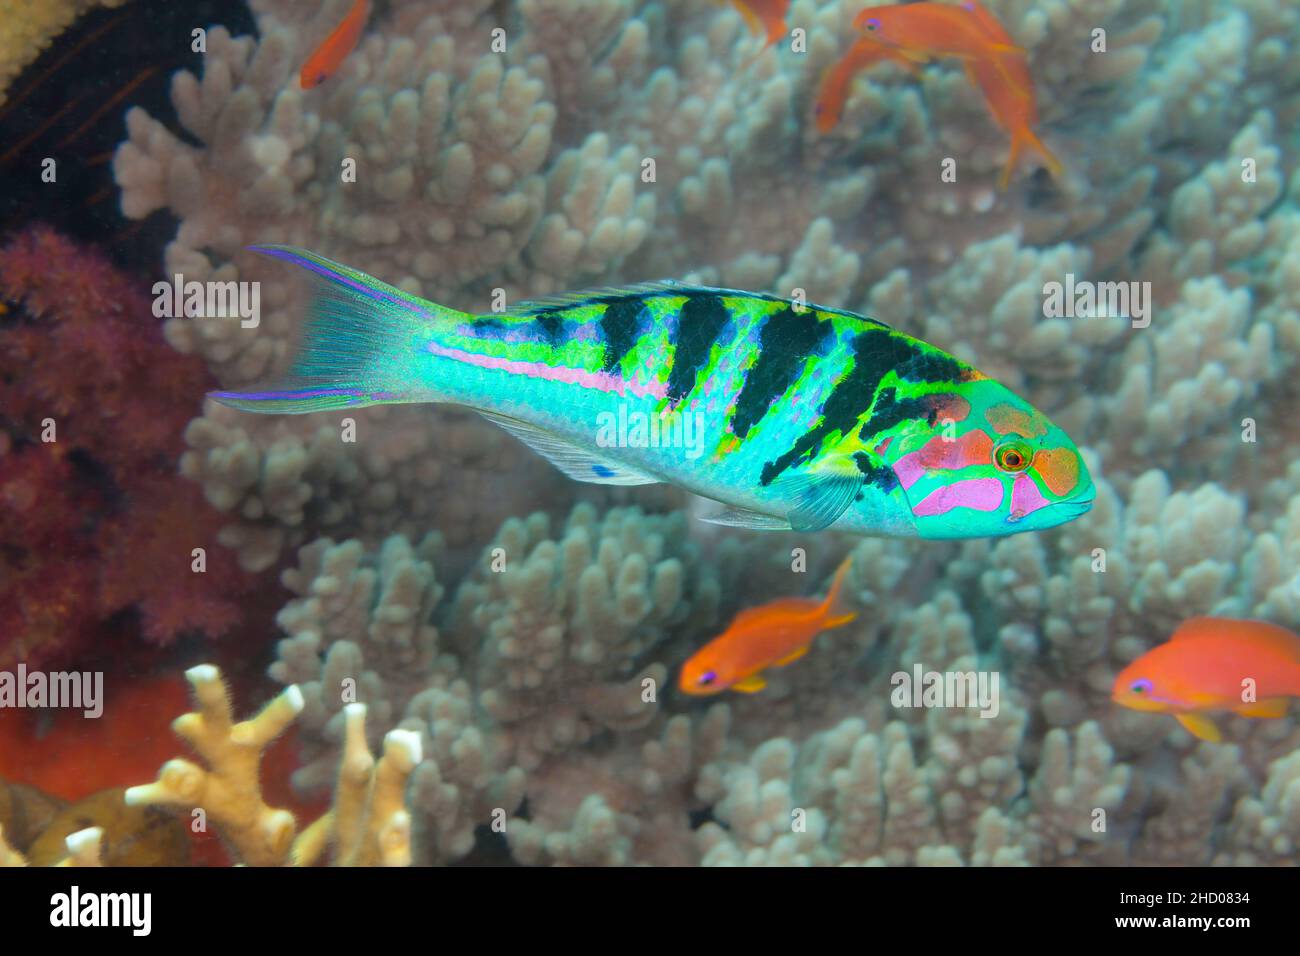 An adult sixbar wrasse, Thalassoma hardwicke, reaches 8 inches in length, Fiji. Stock Photo